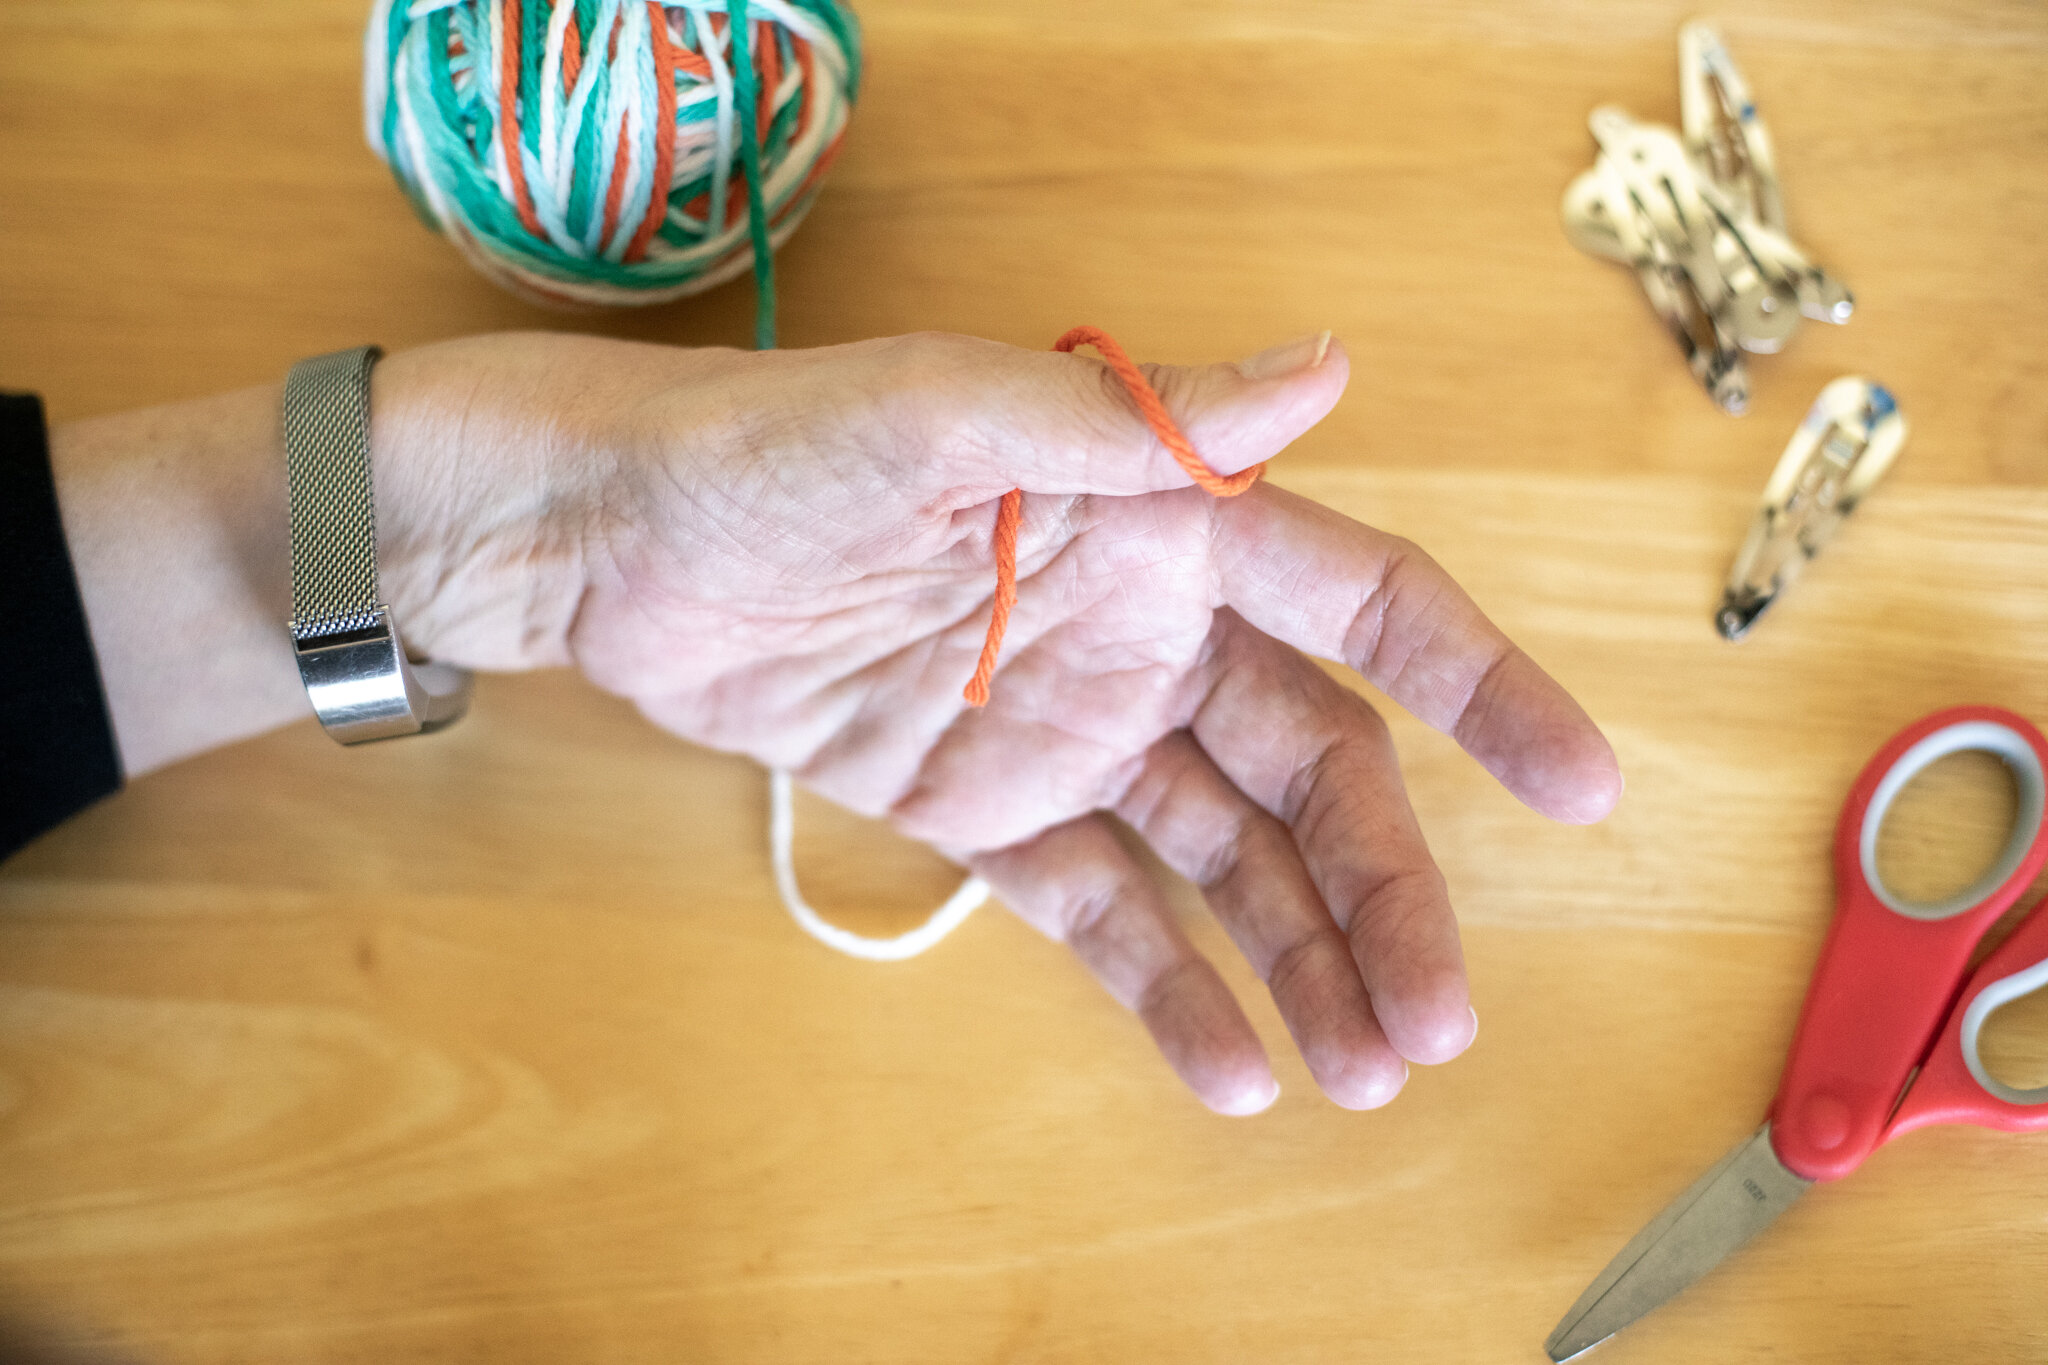  Loop the yarn around your thumb and behind your fingers. Keep pinching the “tail” of yarn so it doesn’t come loose. 